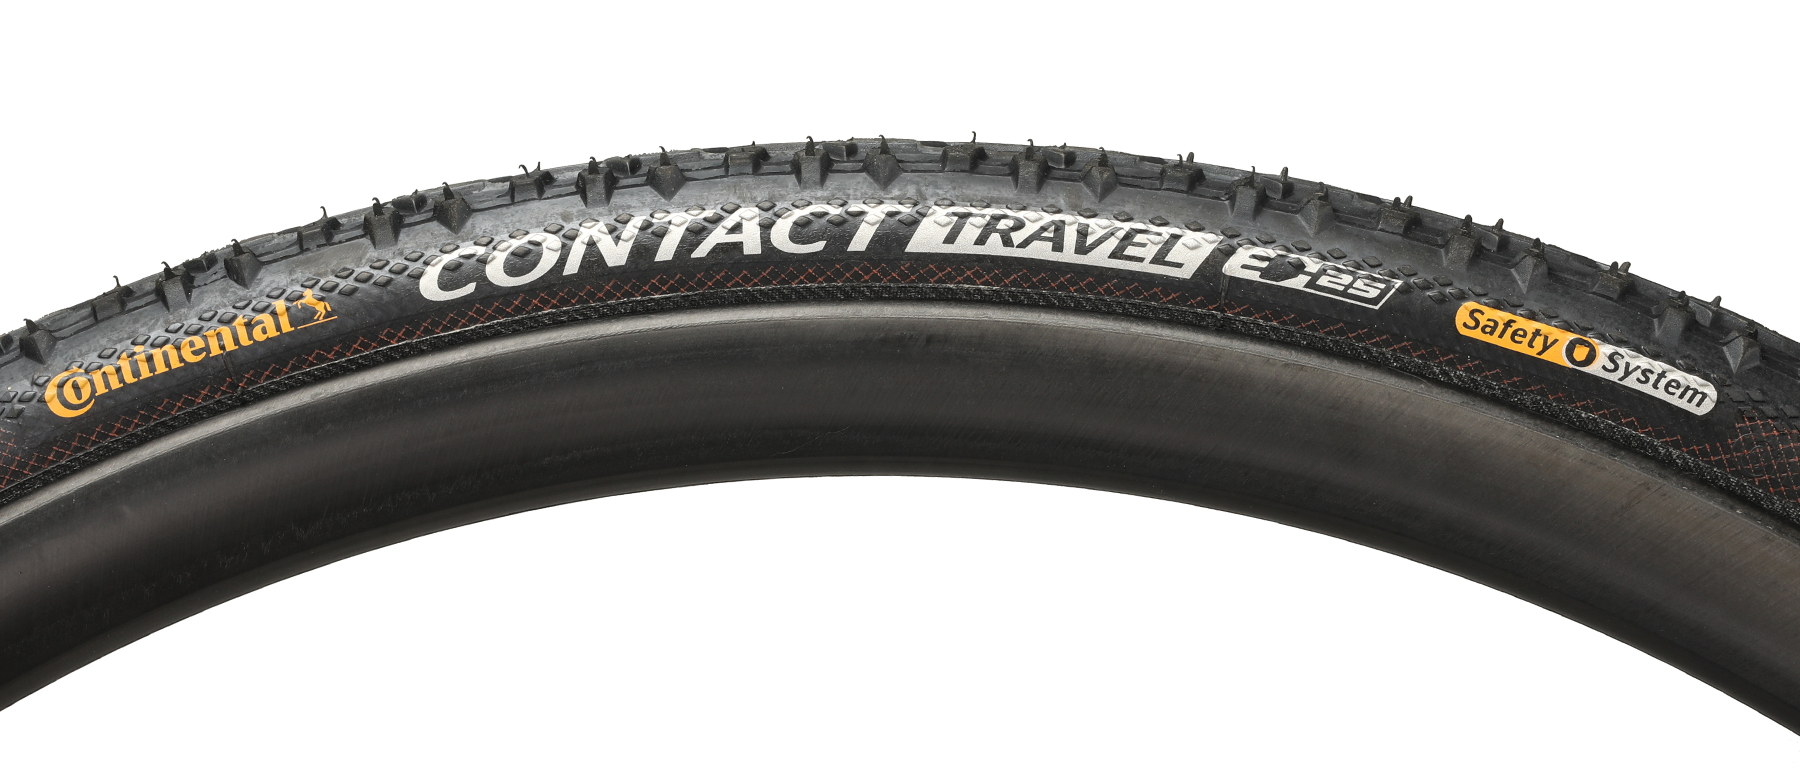 Continental Contact Travel Road Tire